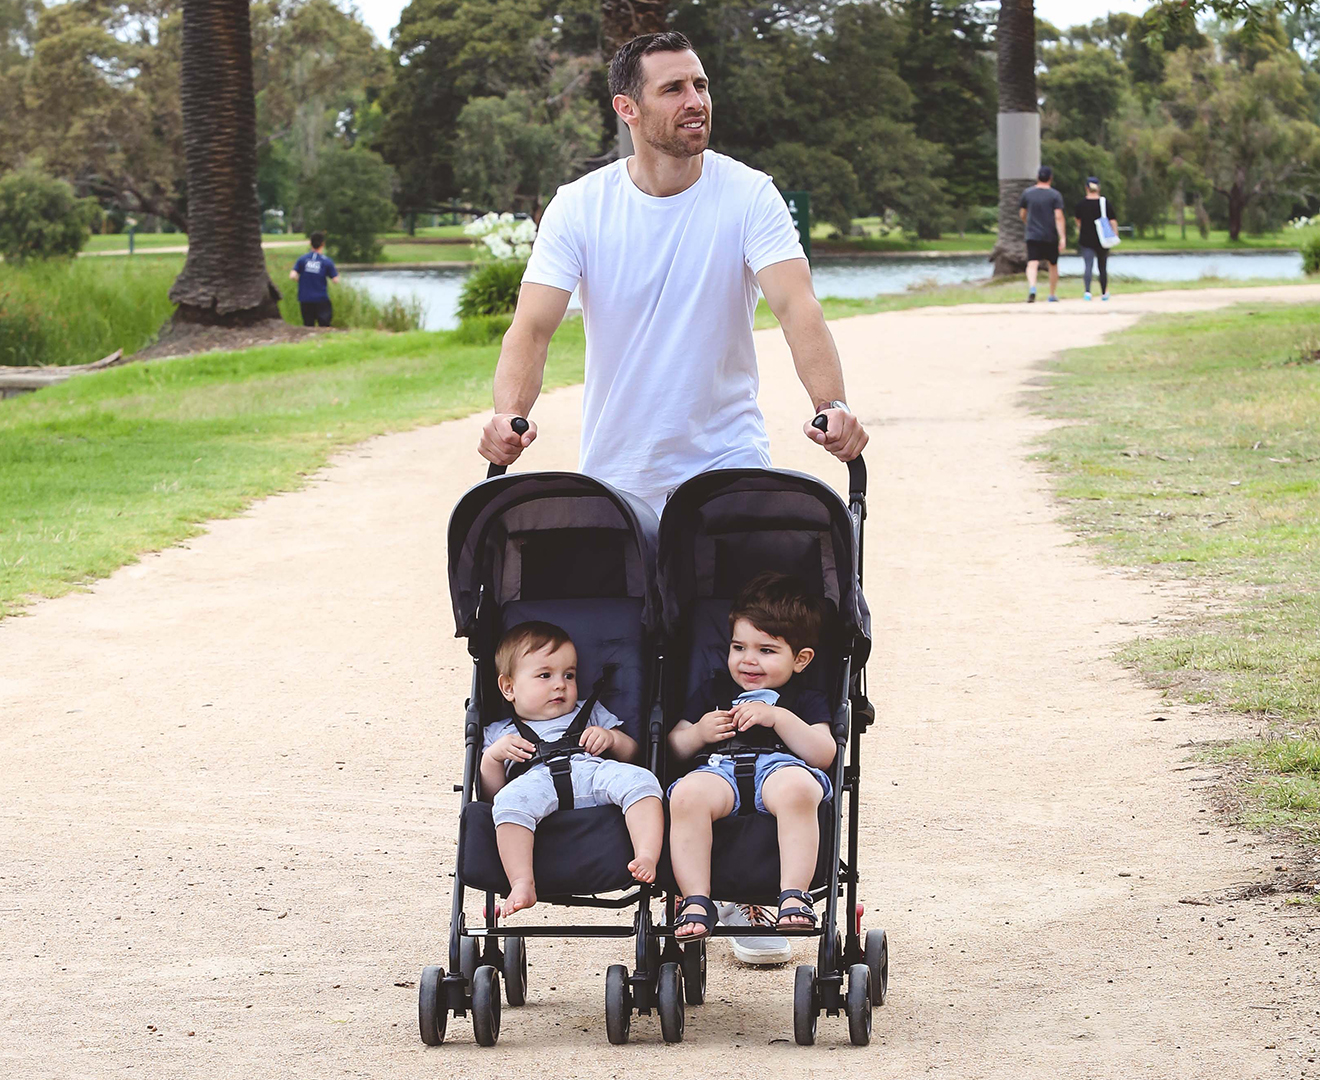 childcare nix twin stroller review